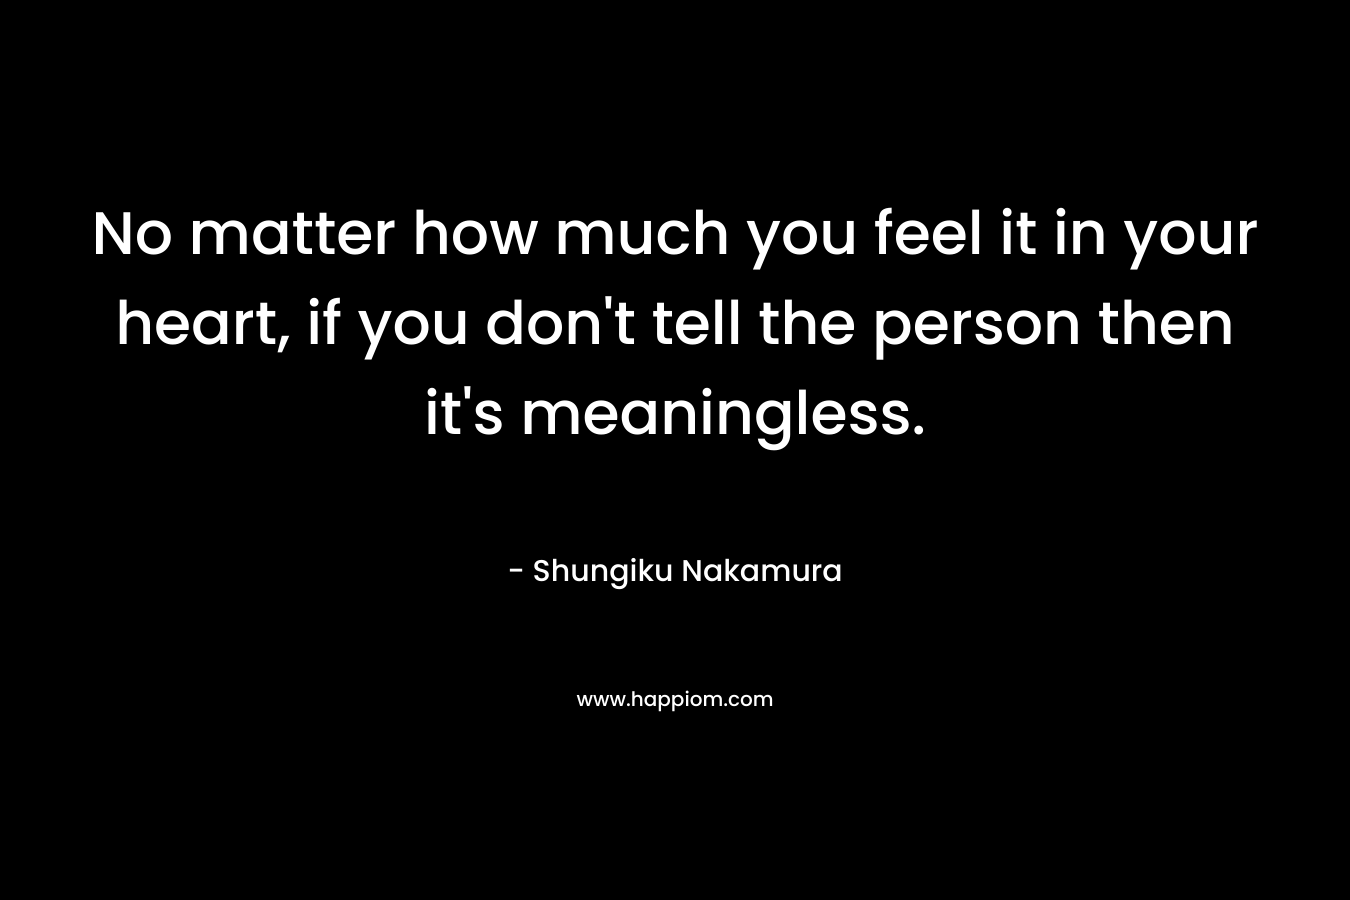 No matter how much you feel it in your heart, if you don't tell the person then it's meaningless.